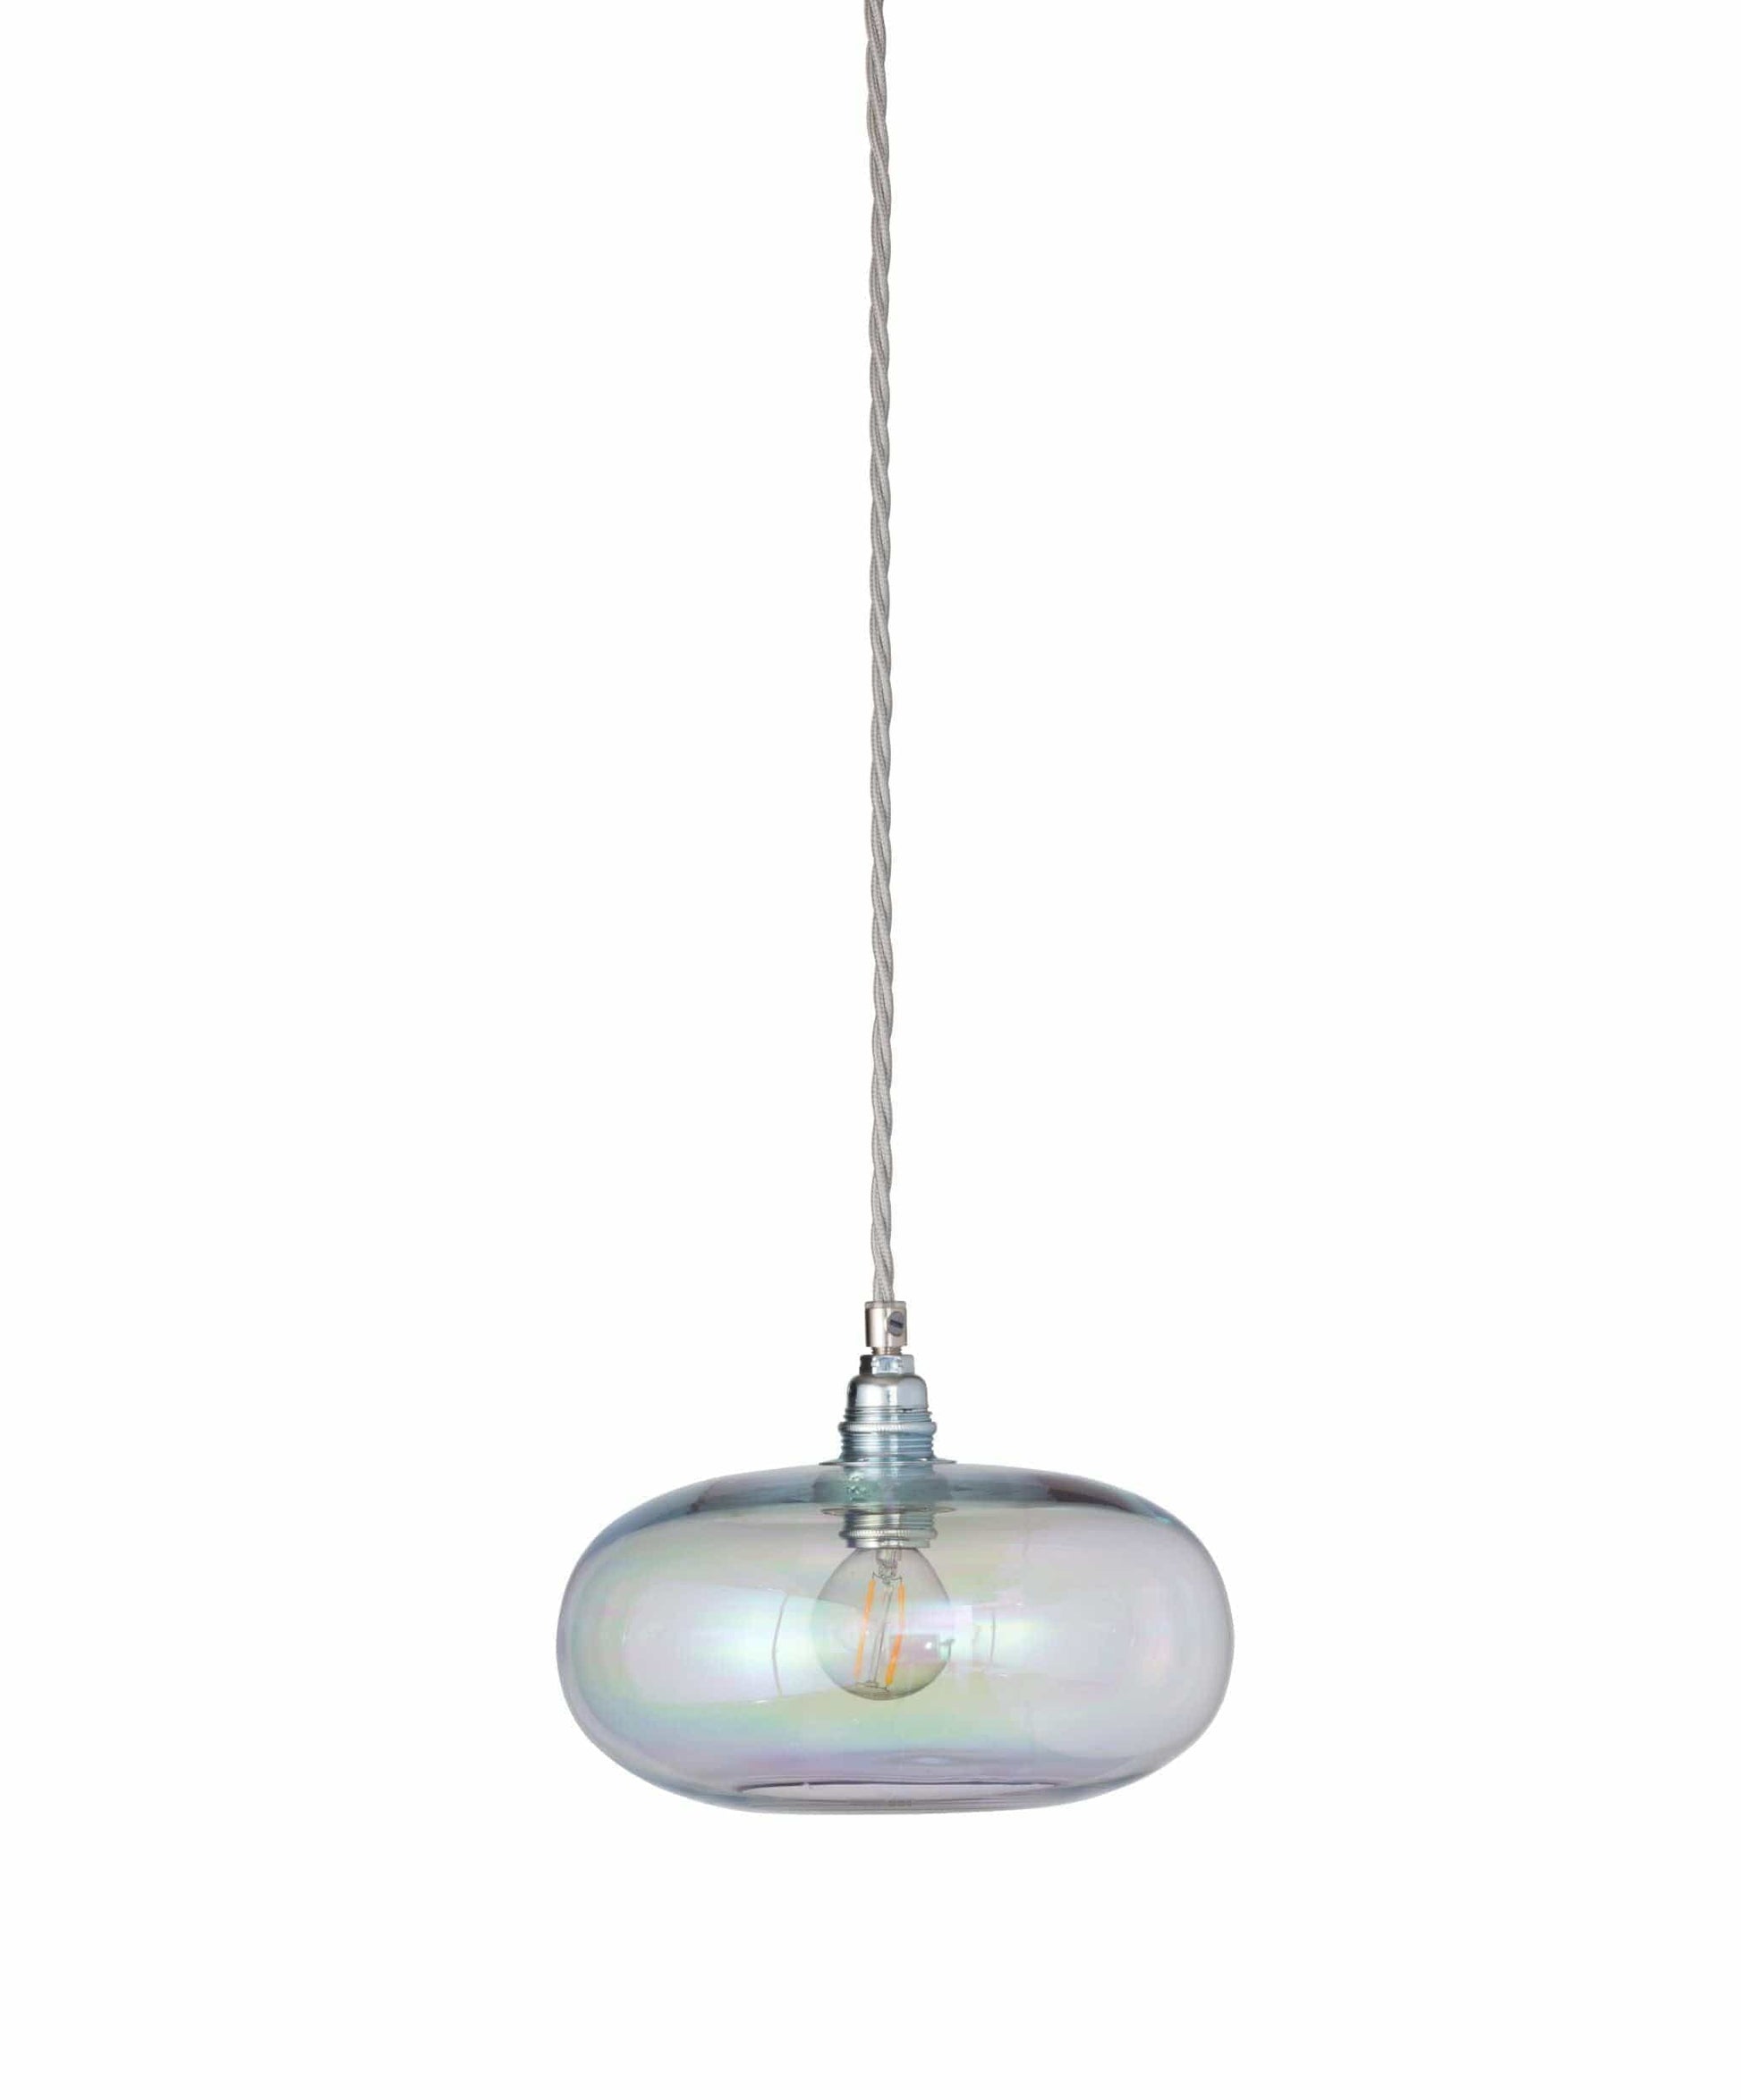 Ebb&Flow Pendant lights Chameleon with silver fittings Horizon Mouth-Blown Glass Pendant Light, small